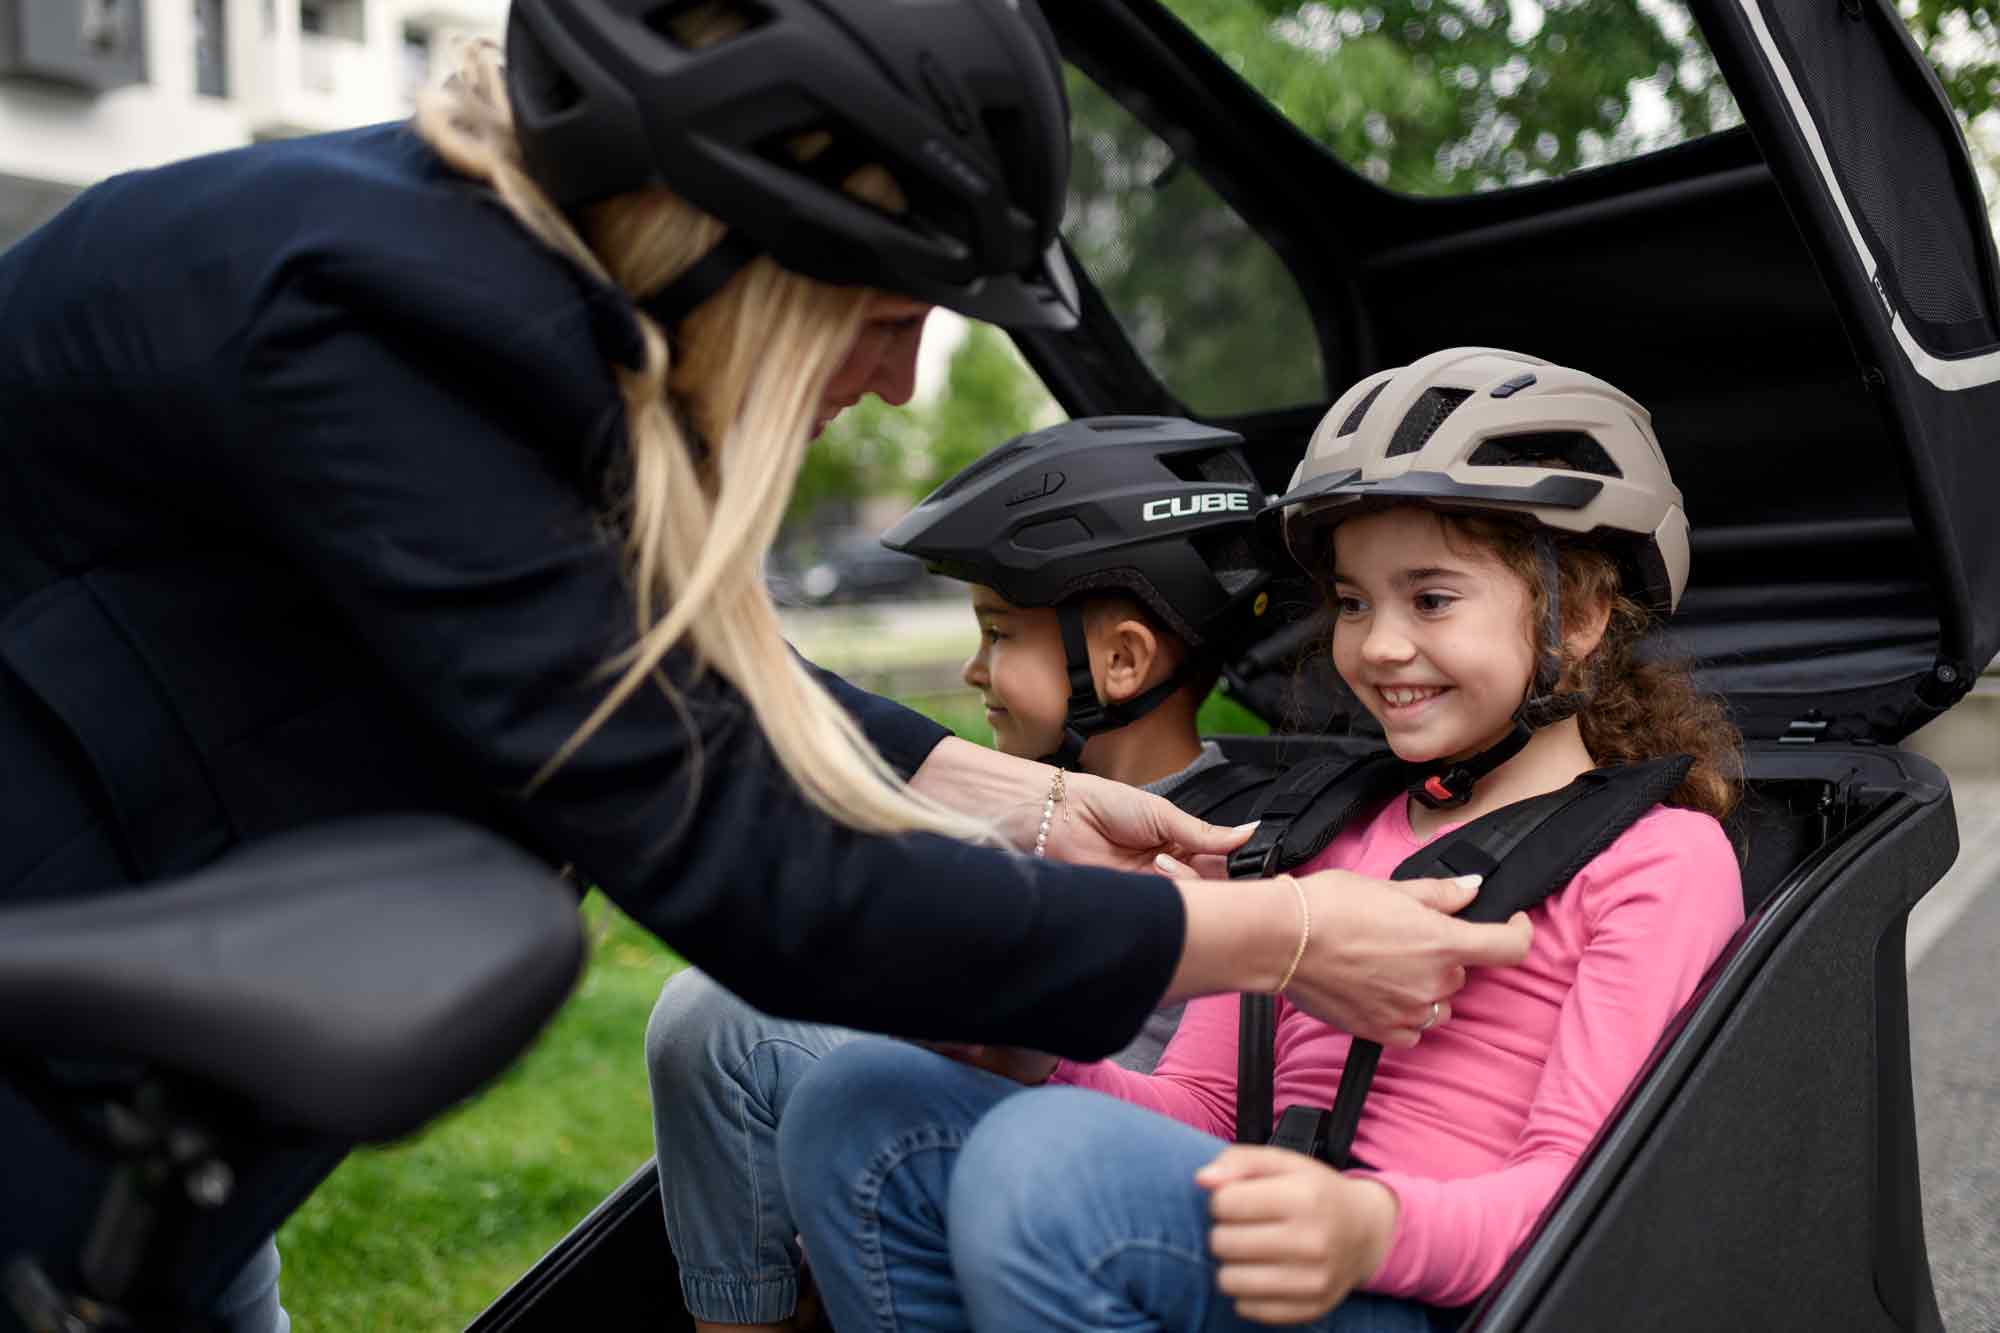 Transporting kids is clearly the main focus of the cube trike family hybrid 750.